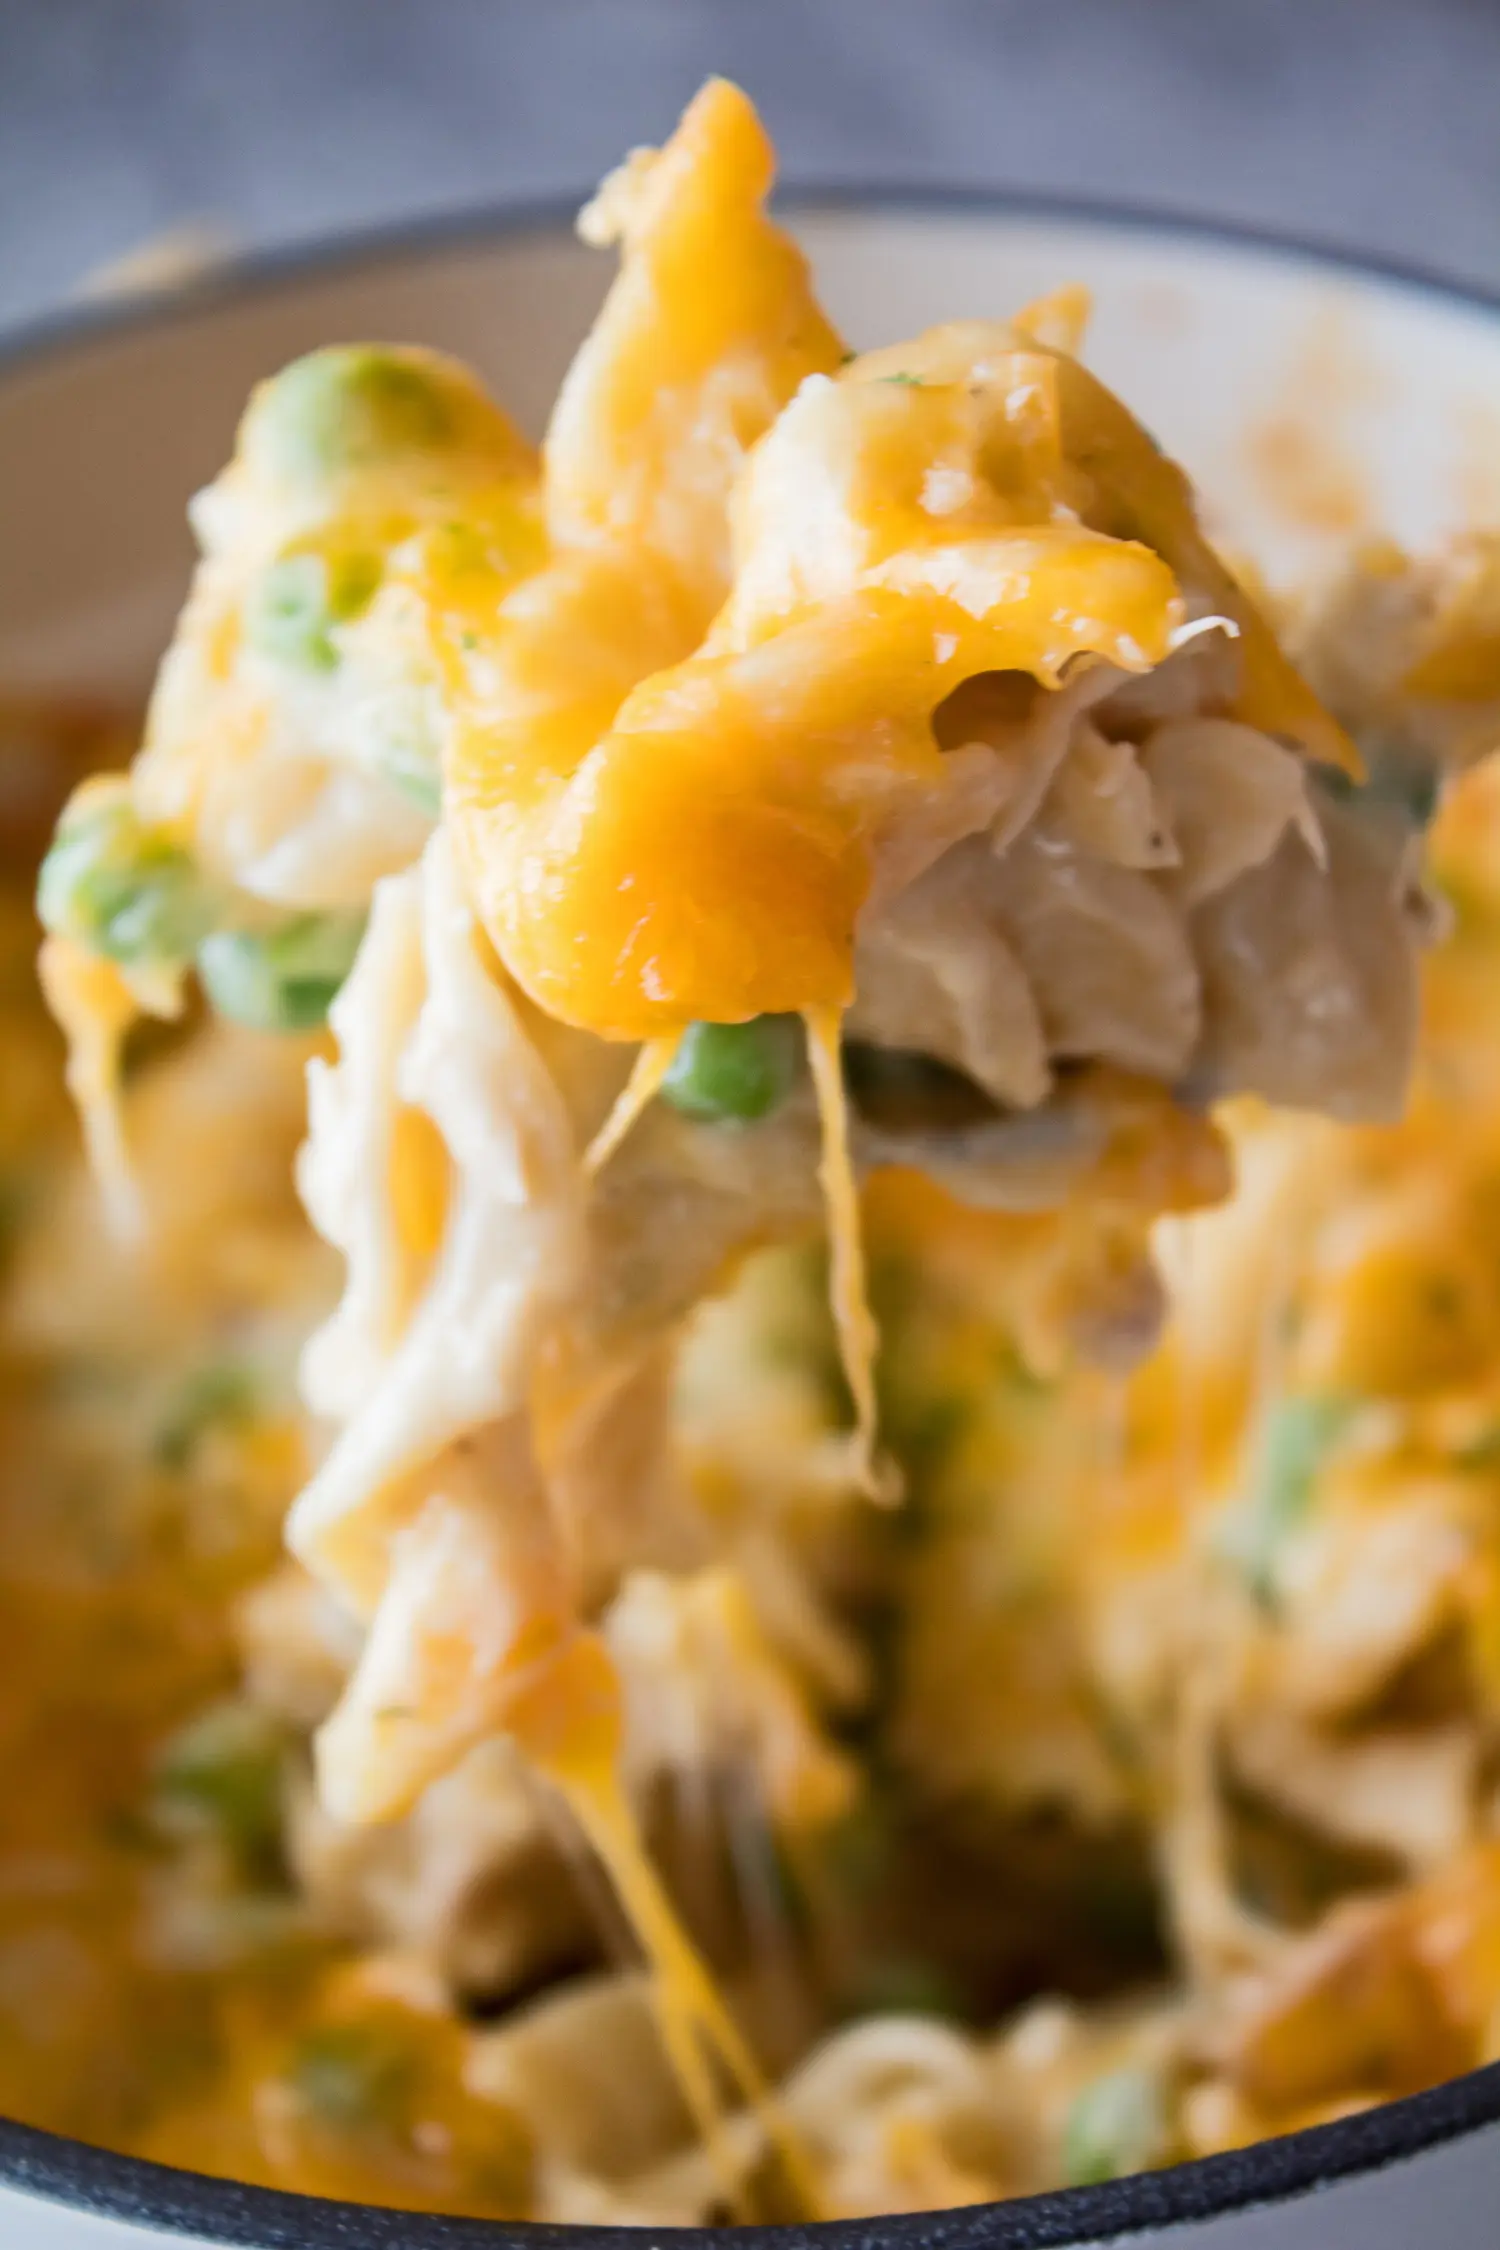 The family classic tuna noodle casserole, serving up all sorts of cheesy goodness!